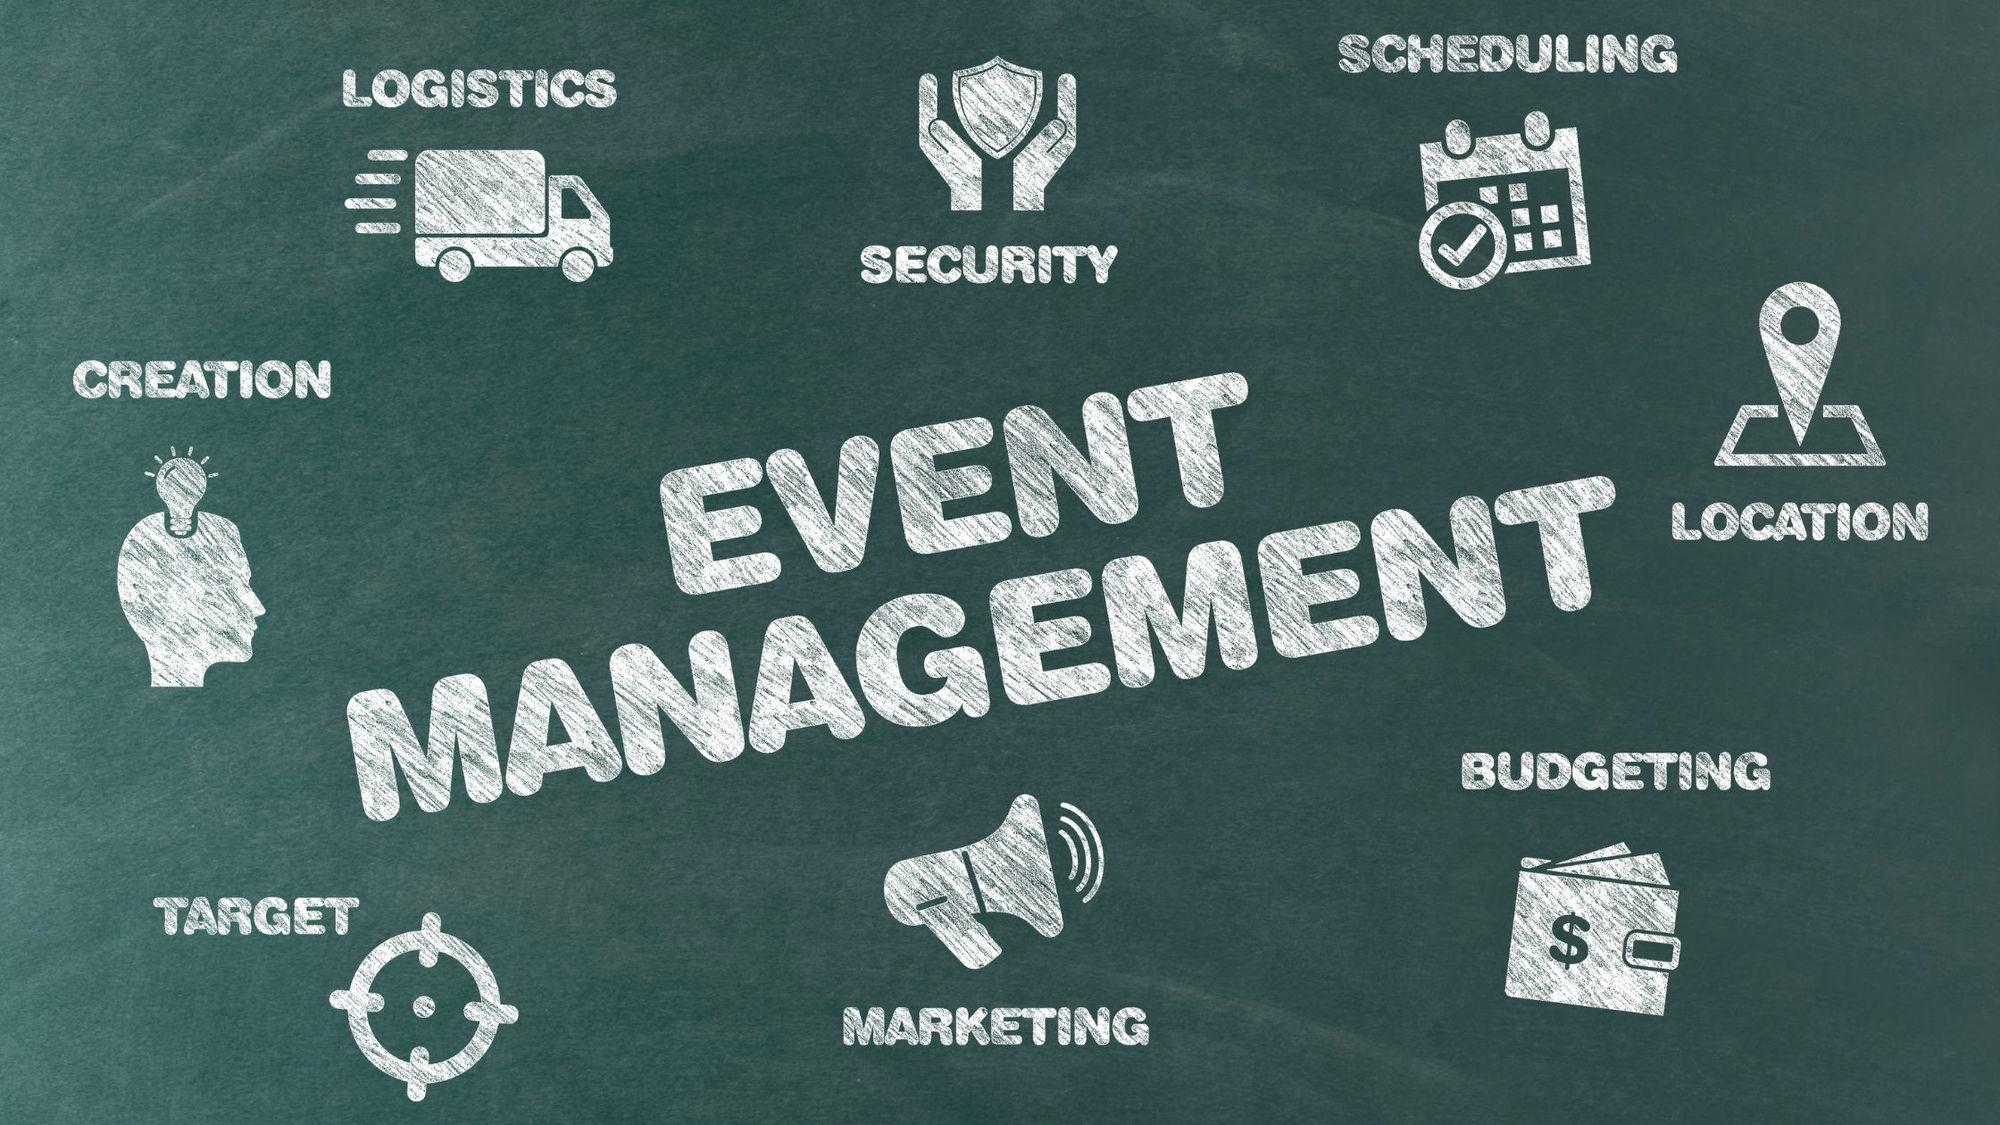 The definitive guide to event planning